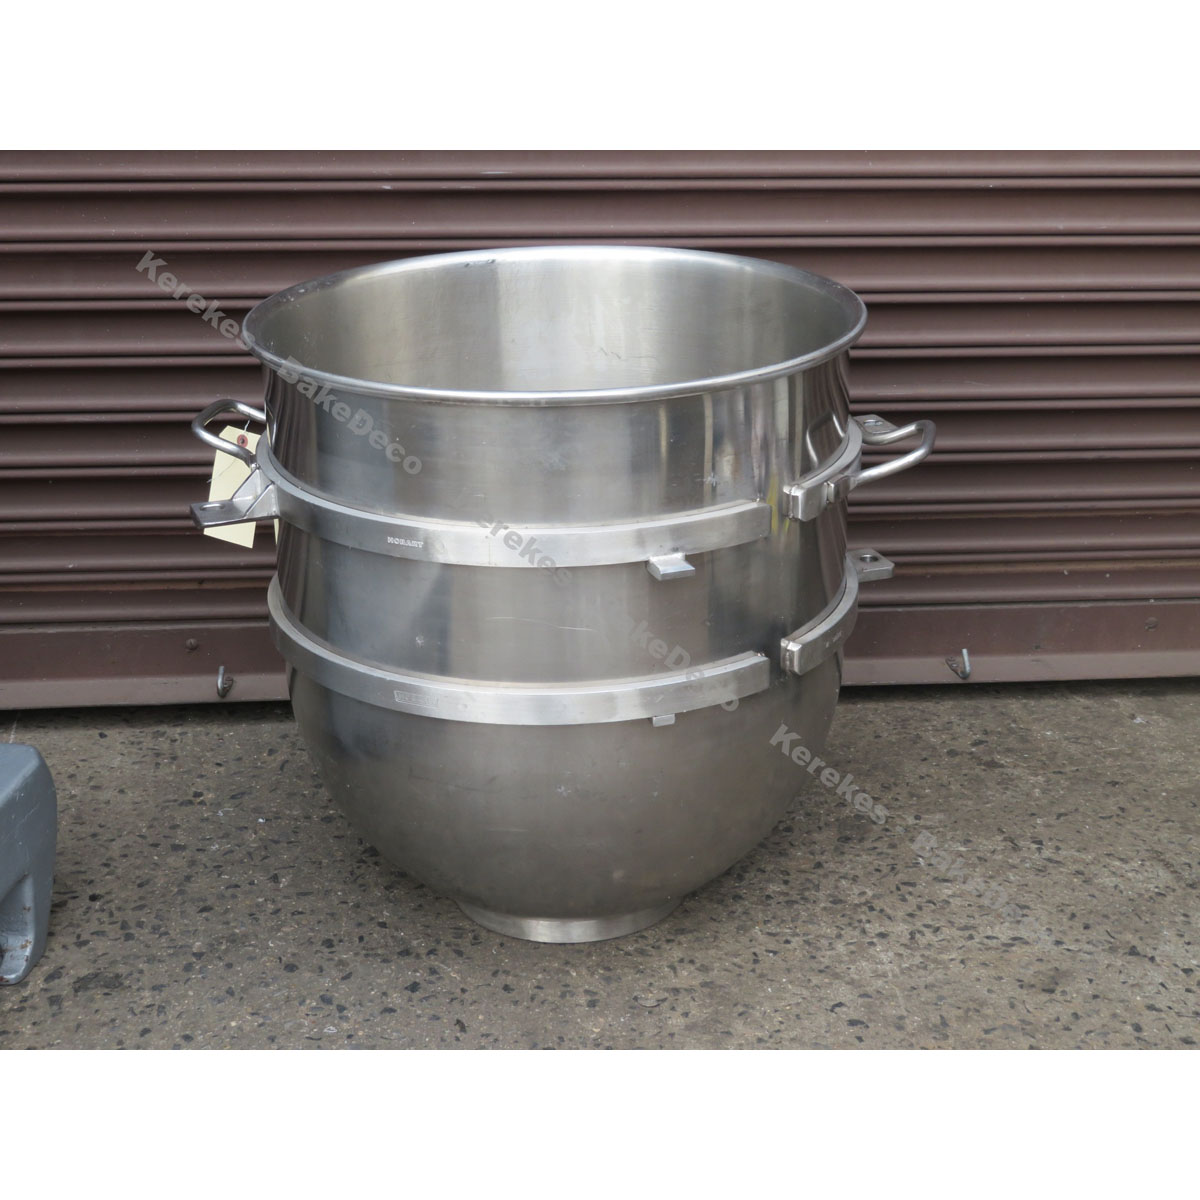 Hobart BOWL-HL140 140 Quart Stainless Steel Bowl for HL1400 Mixer, Used Great Condition image 3